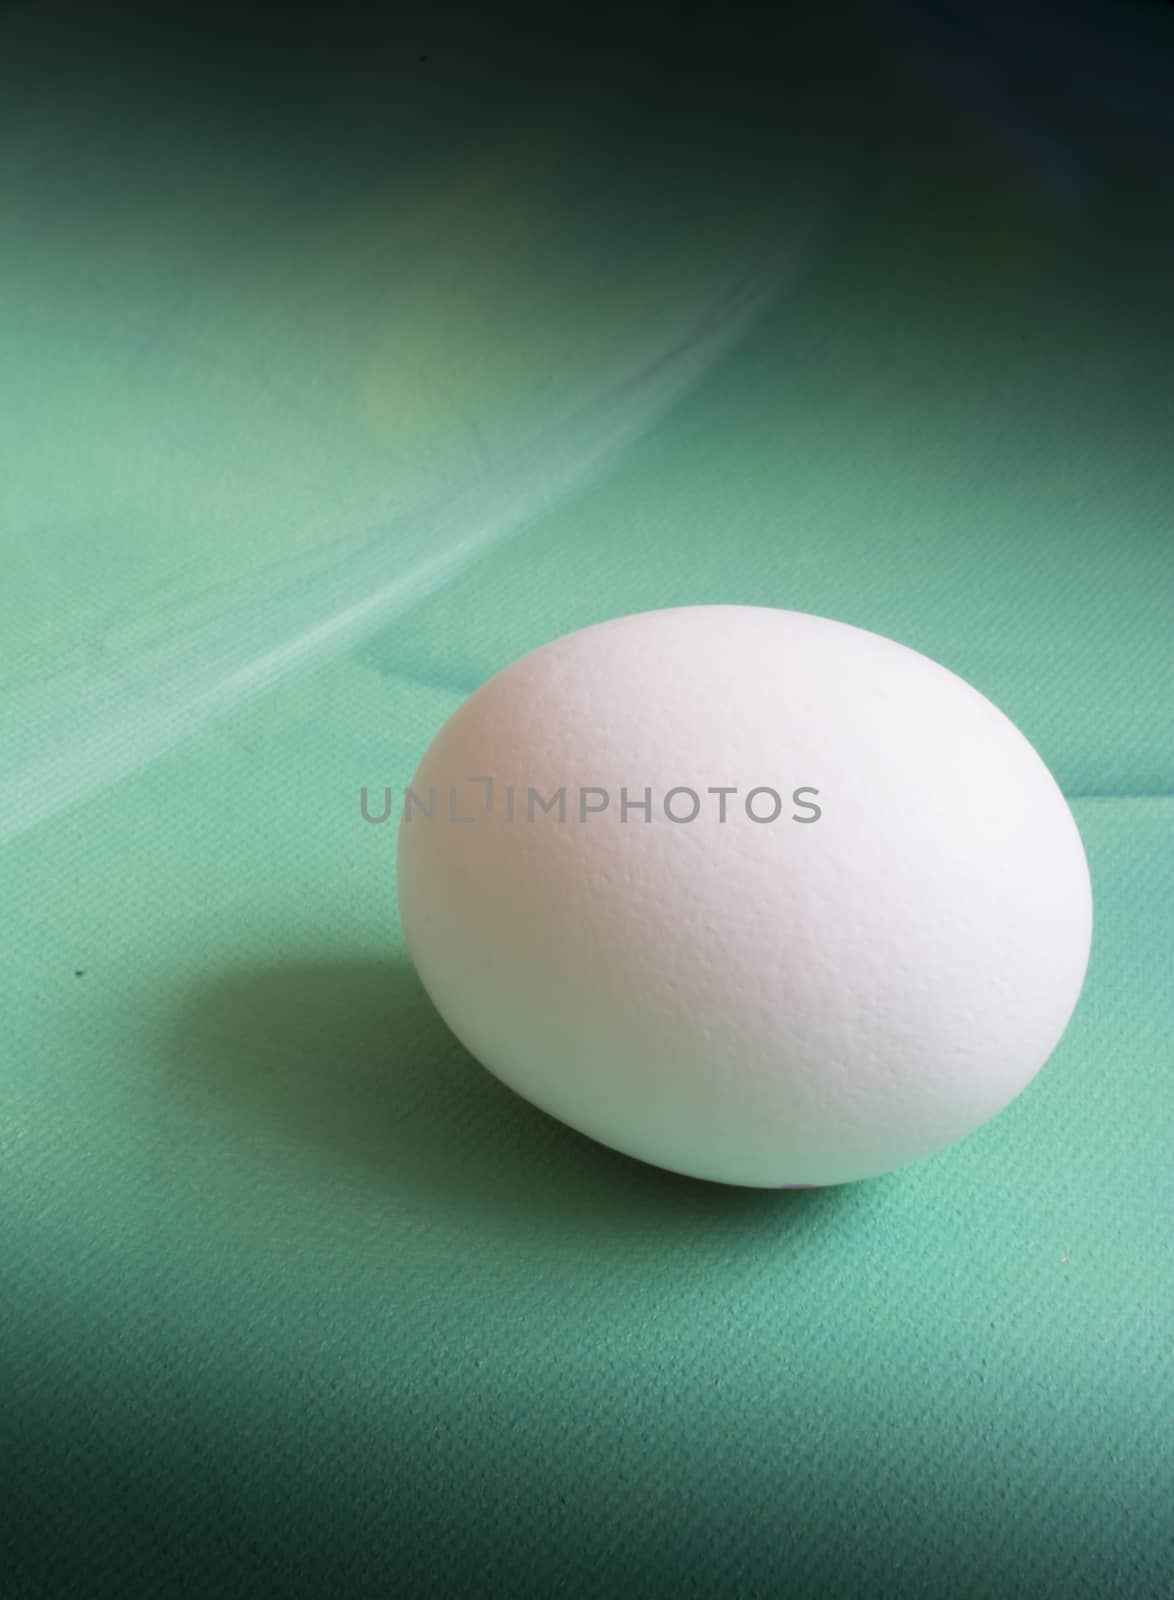 White egg on green canvas, vertical image.